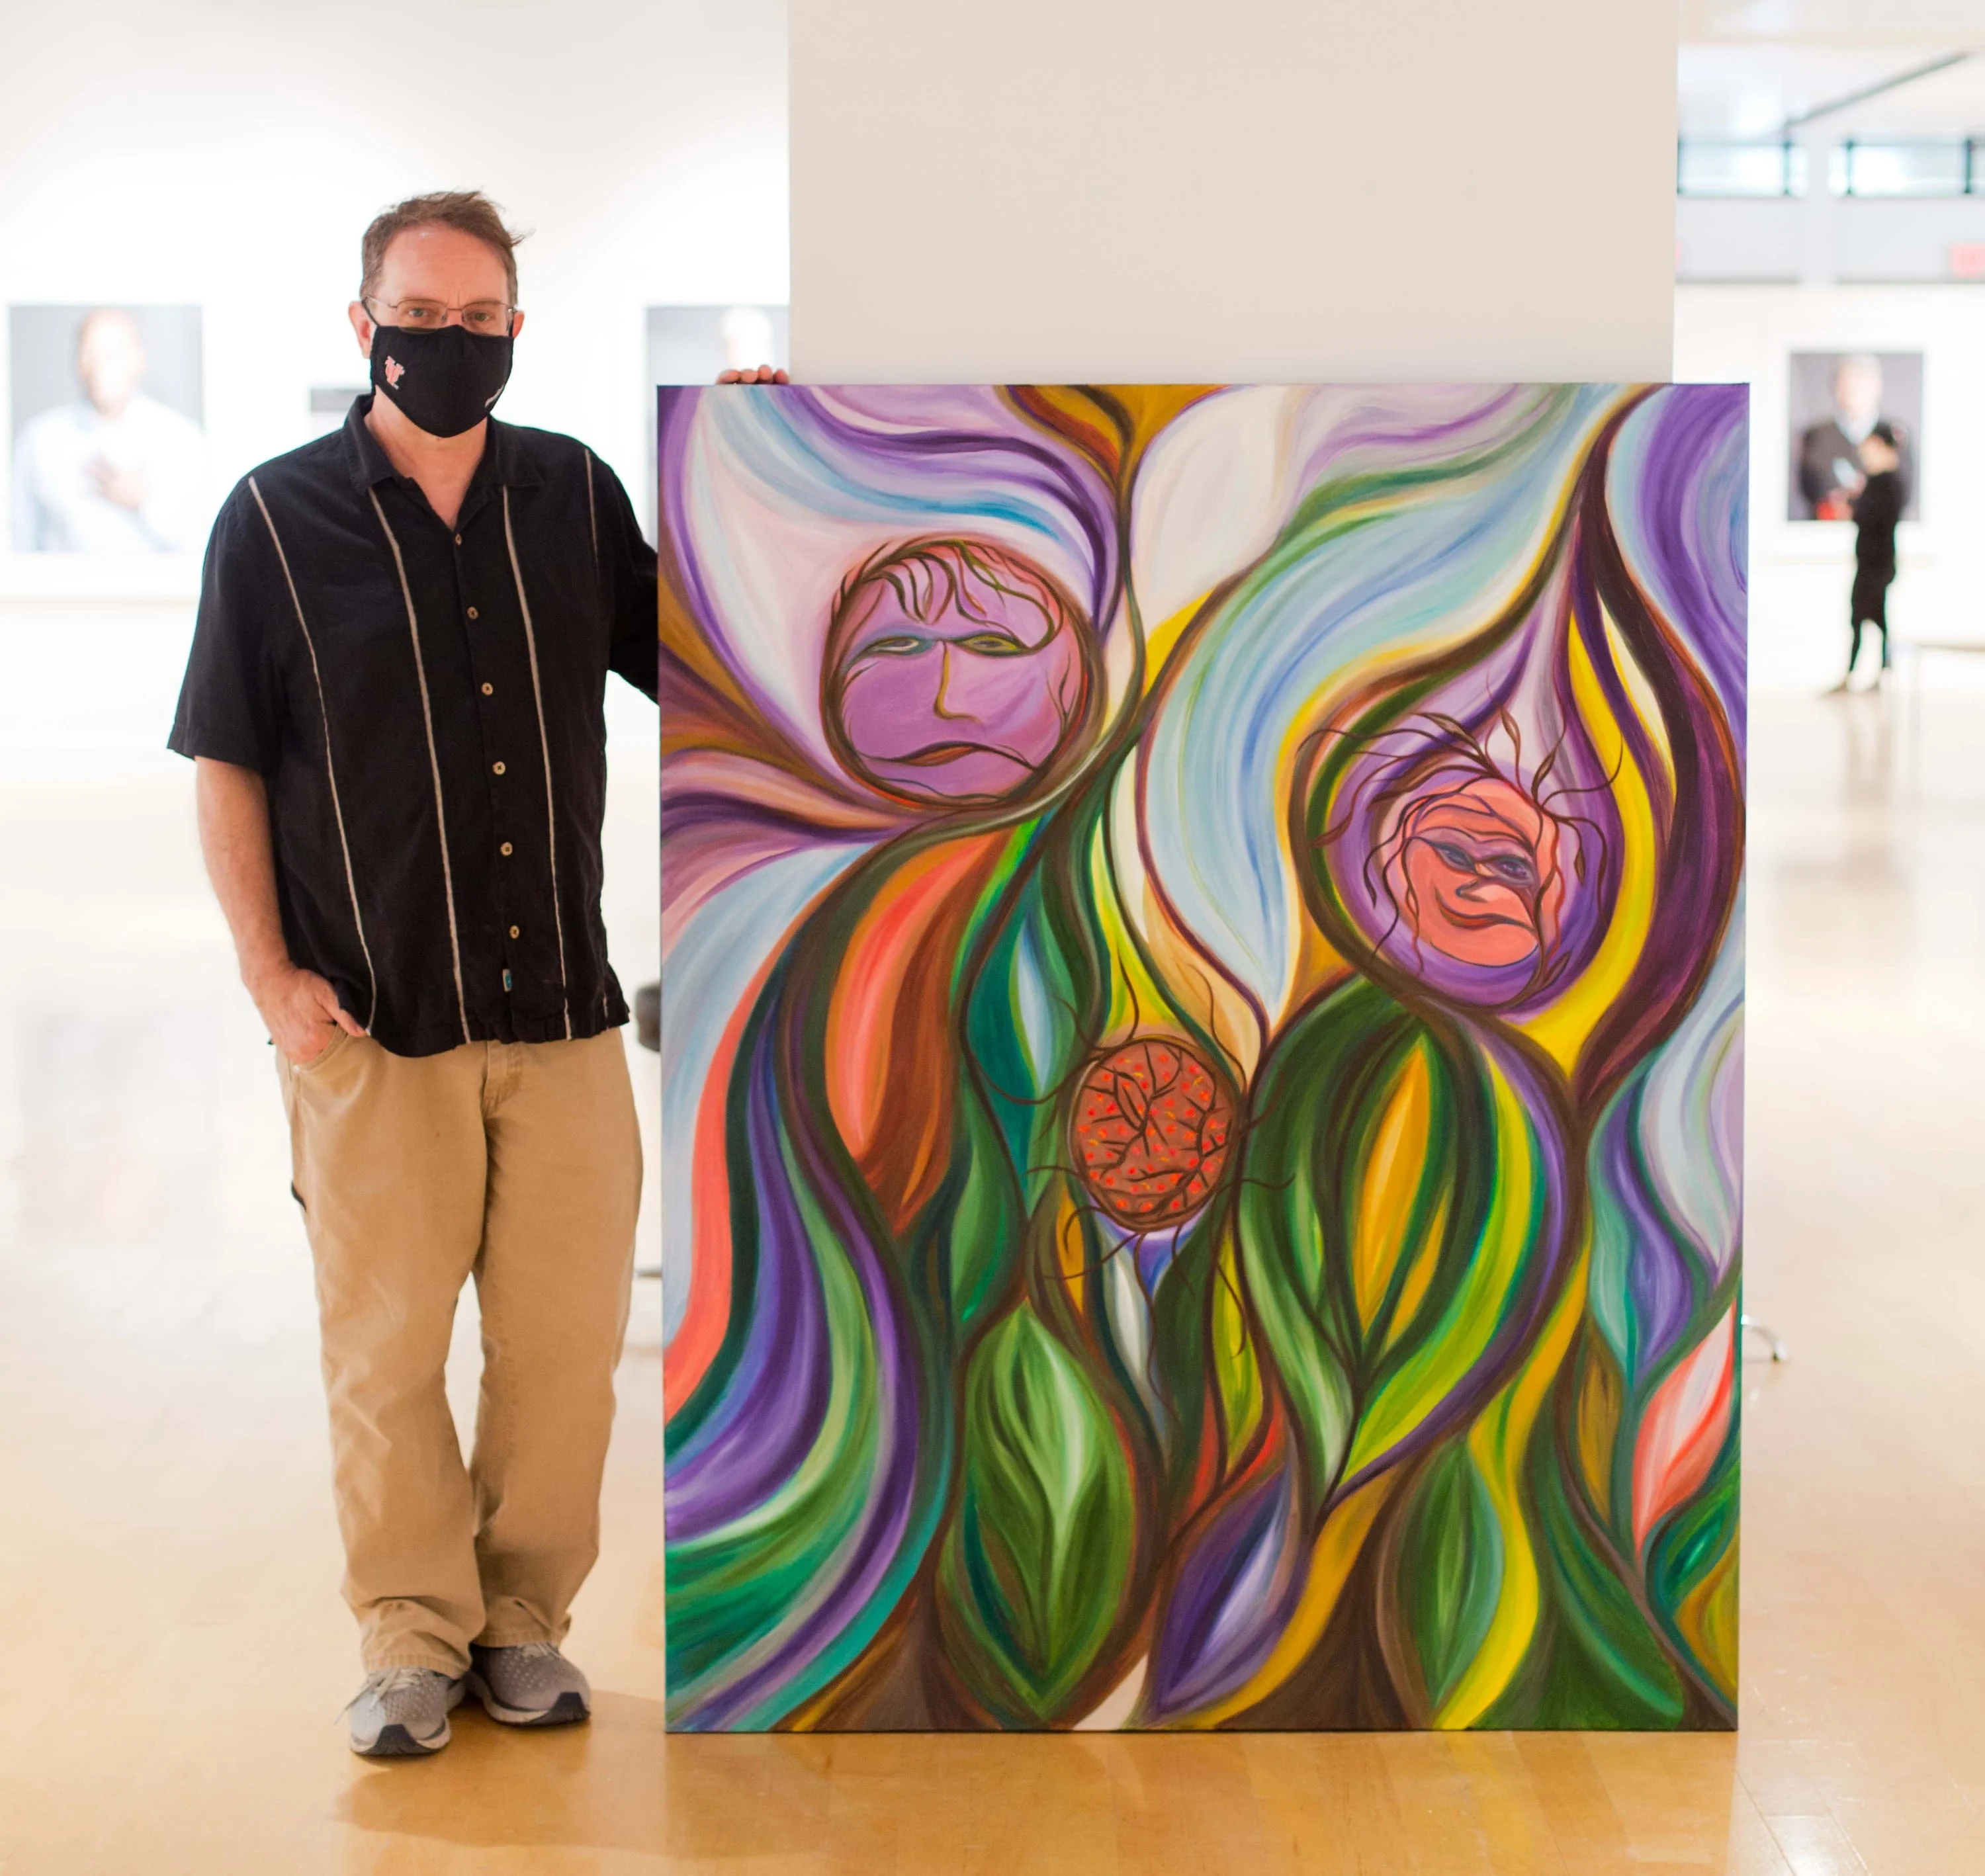 A man standing next to a large painting, the painting goes up to his chin and depicts blended colors and organic shapes, with three abstract faces.